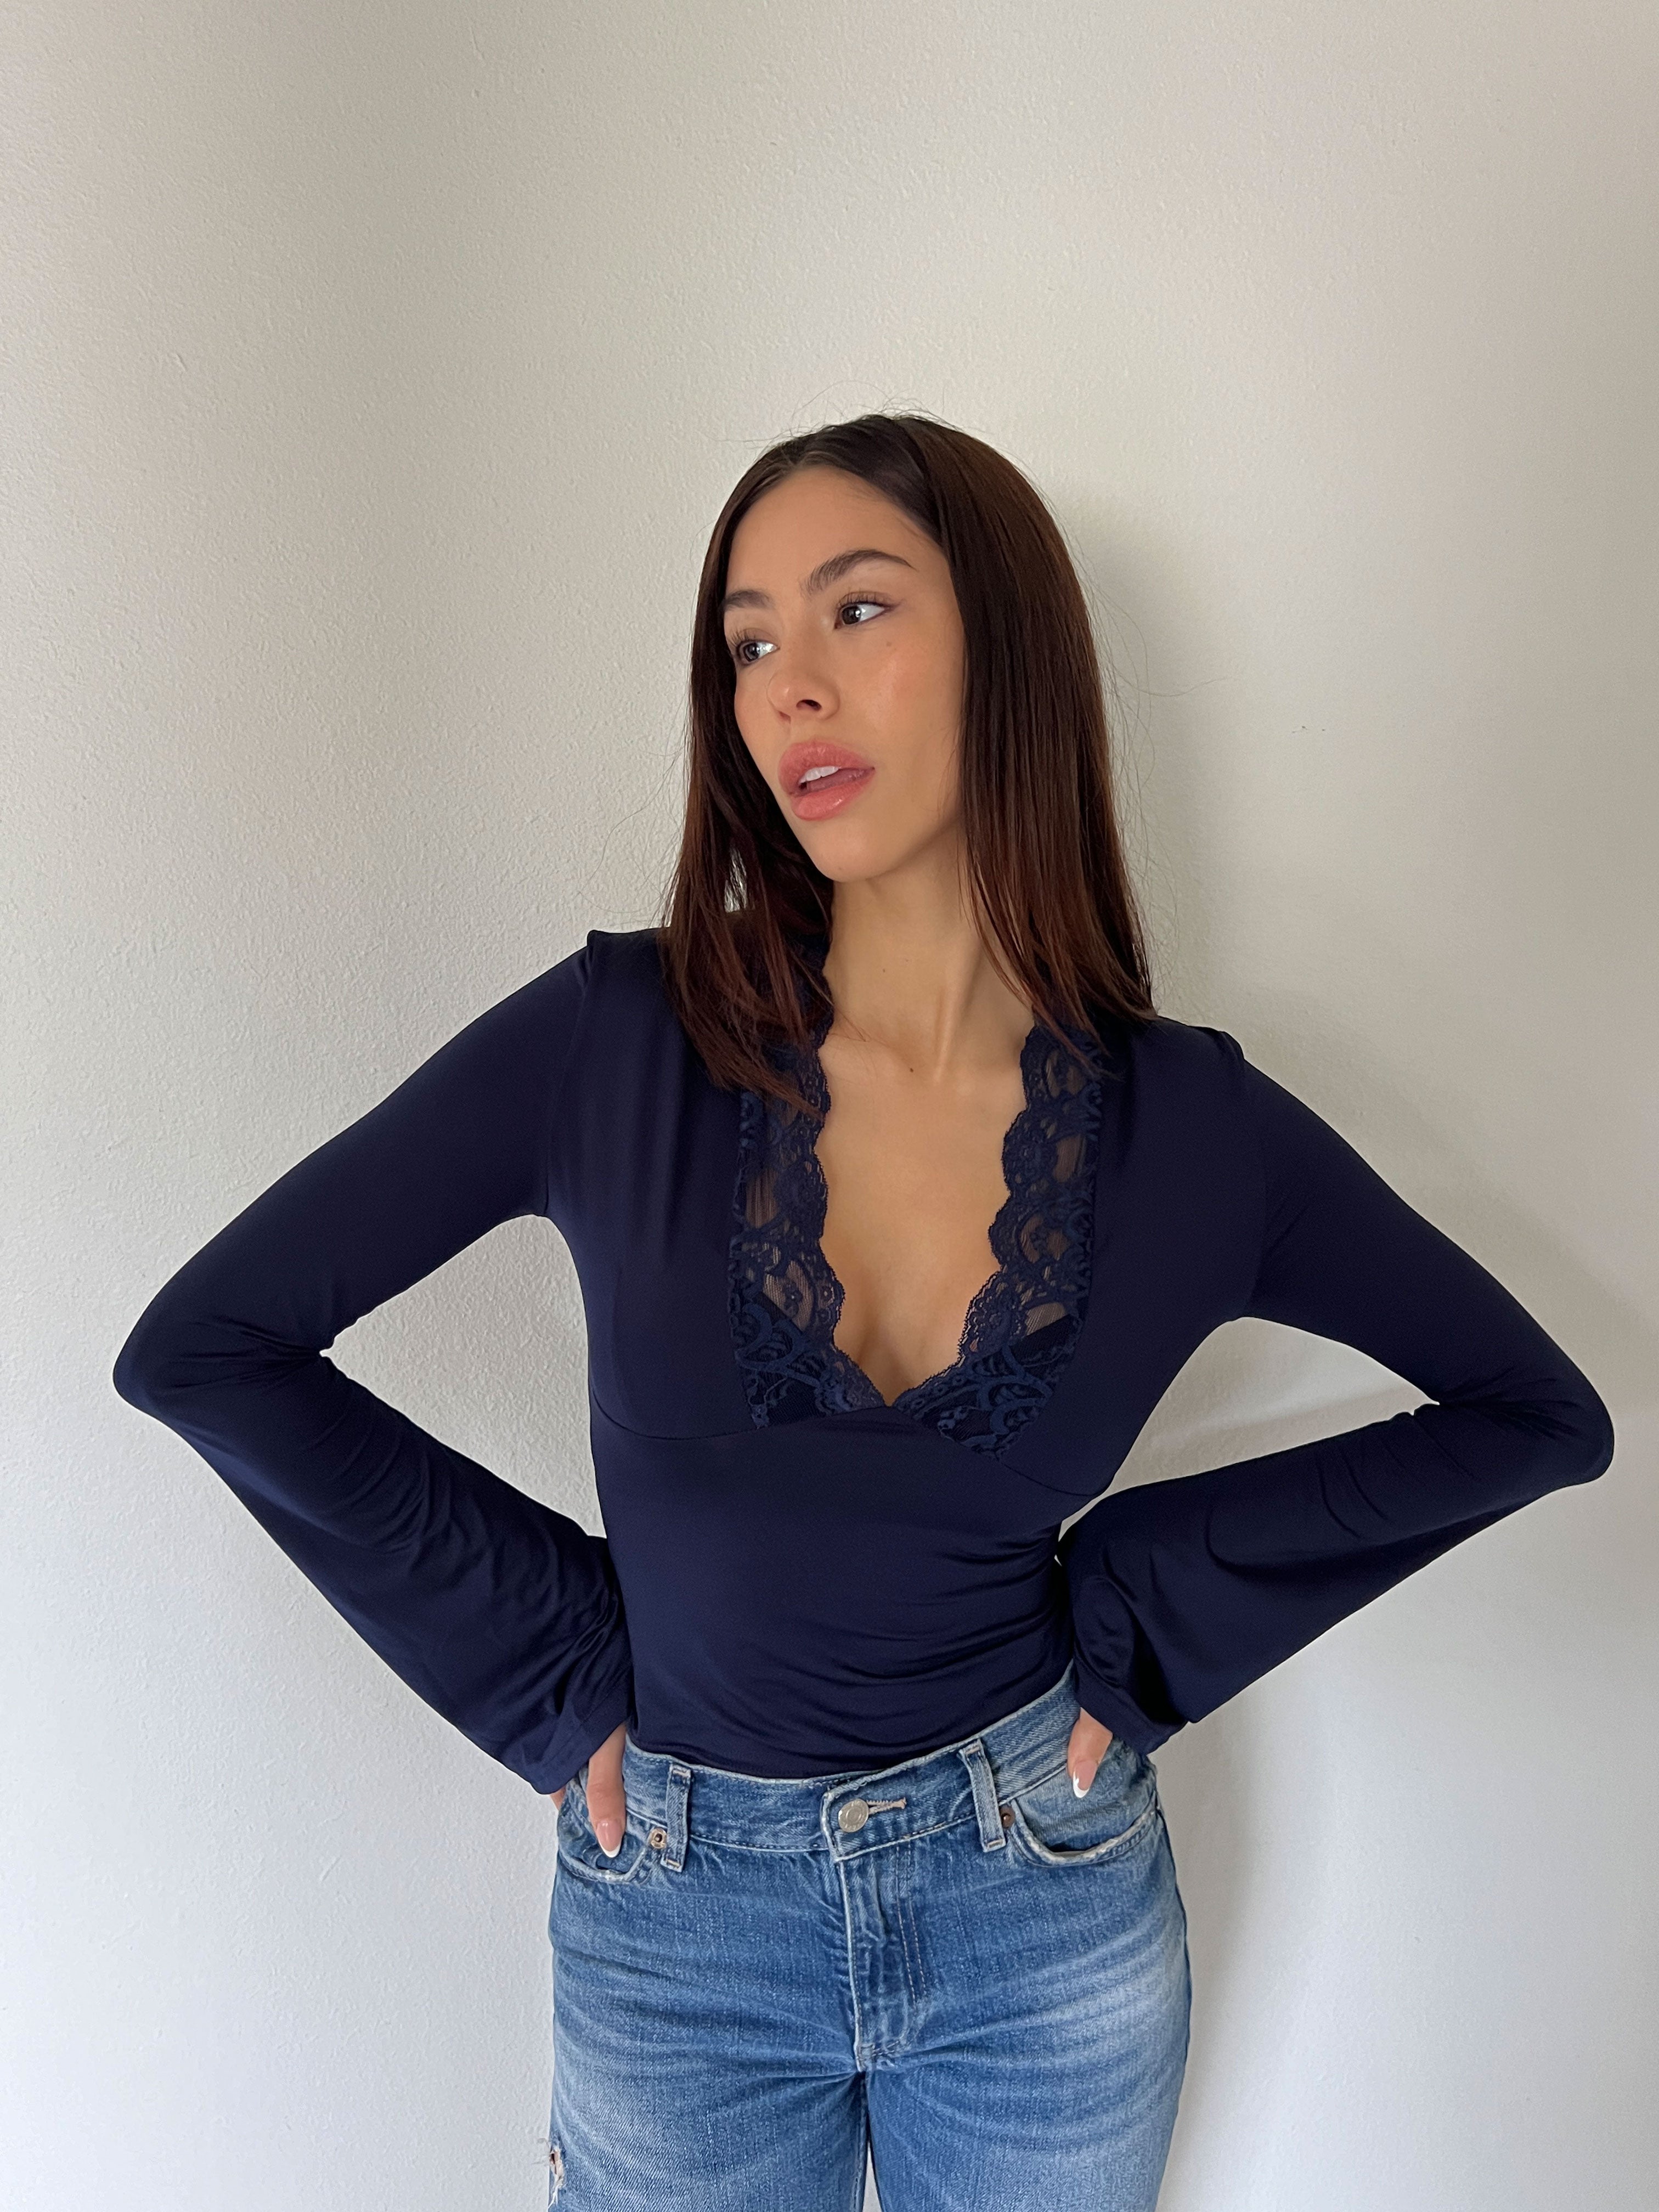 Veyles's Lace Top Perfect Fit Navy blue